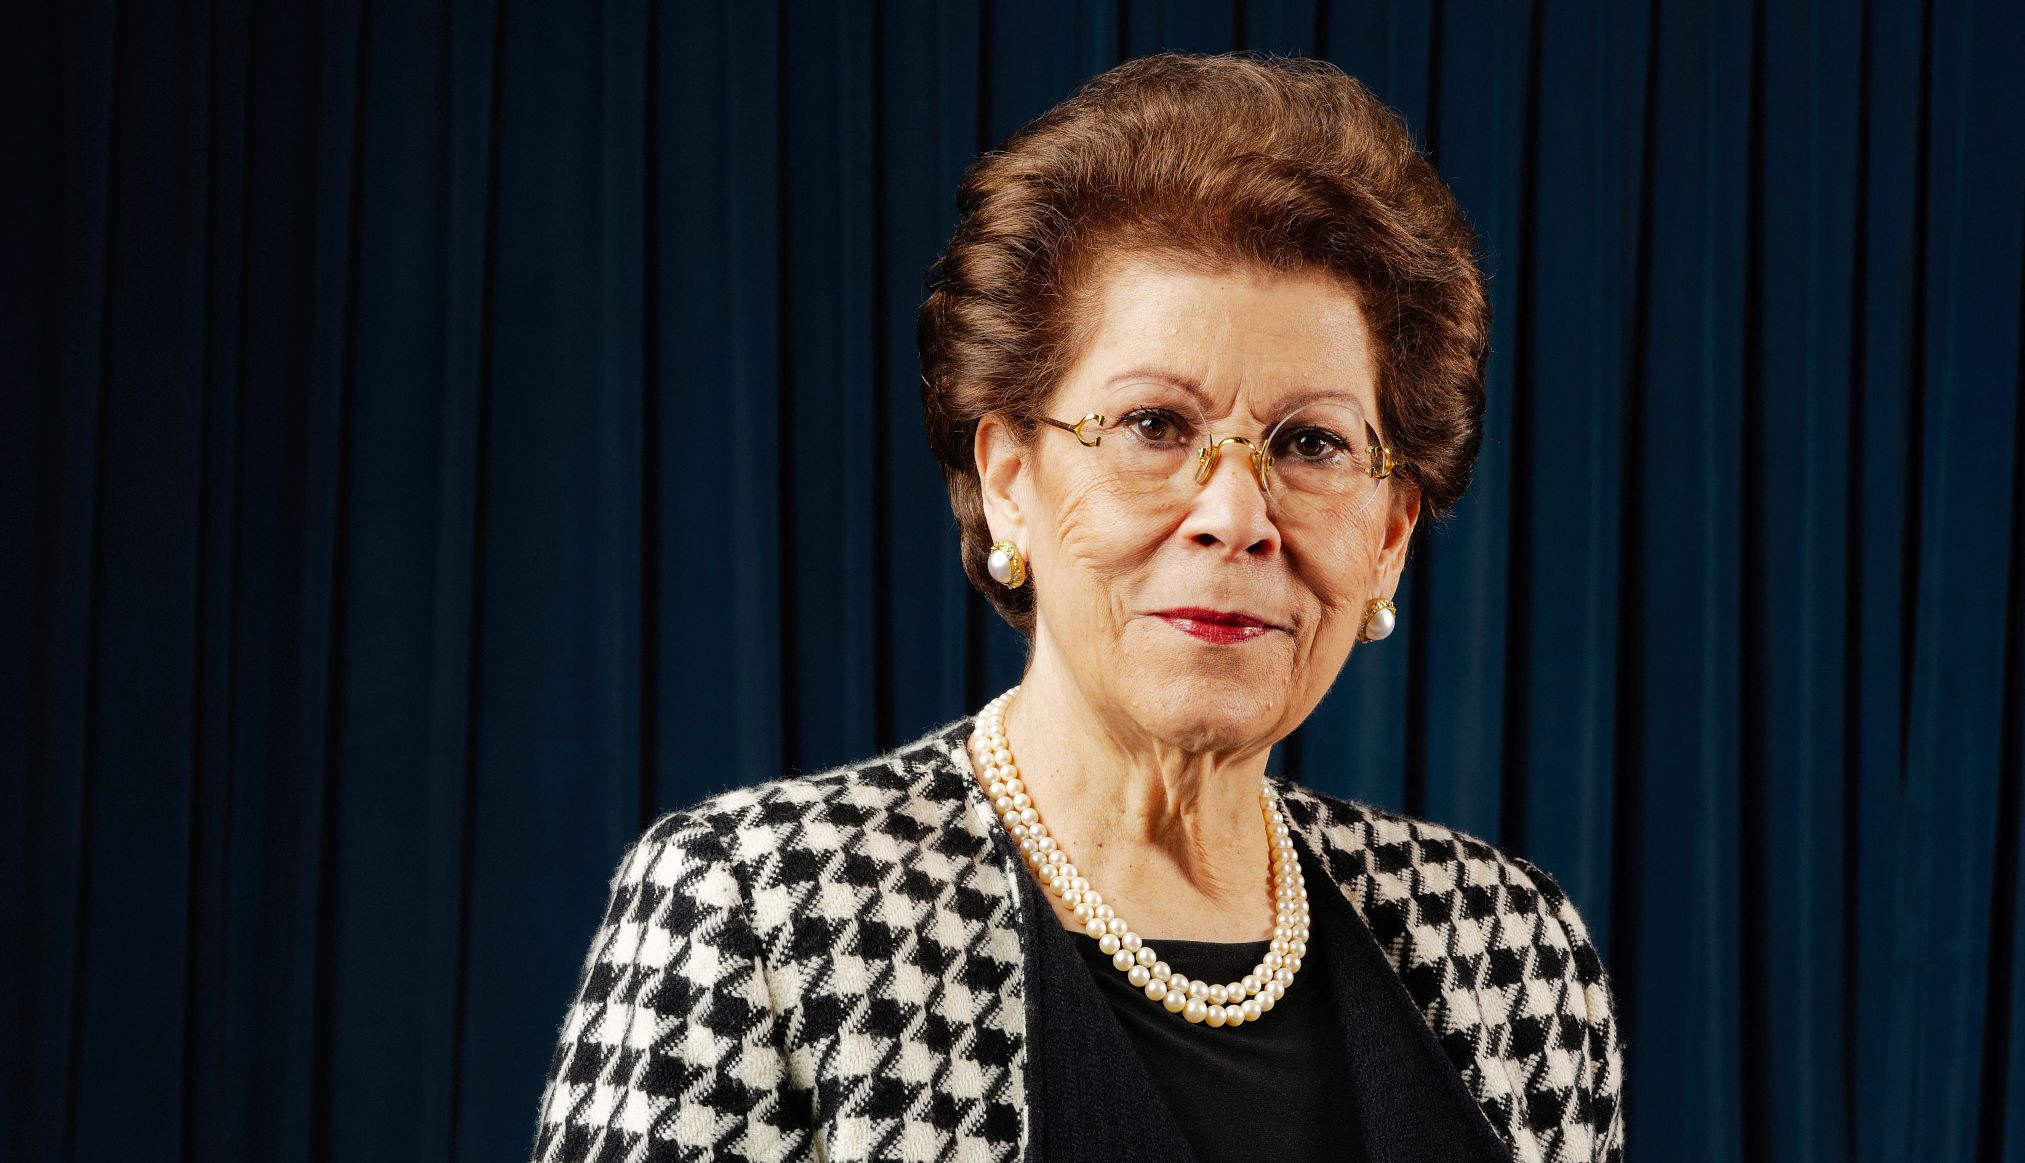 Antonia Novello, M.D. was the surgeon general from 1990-1993